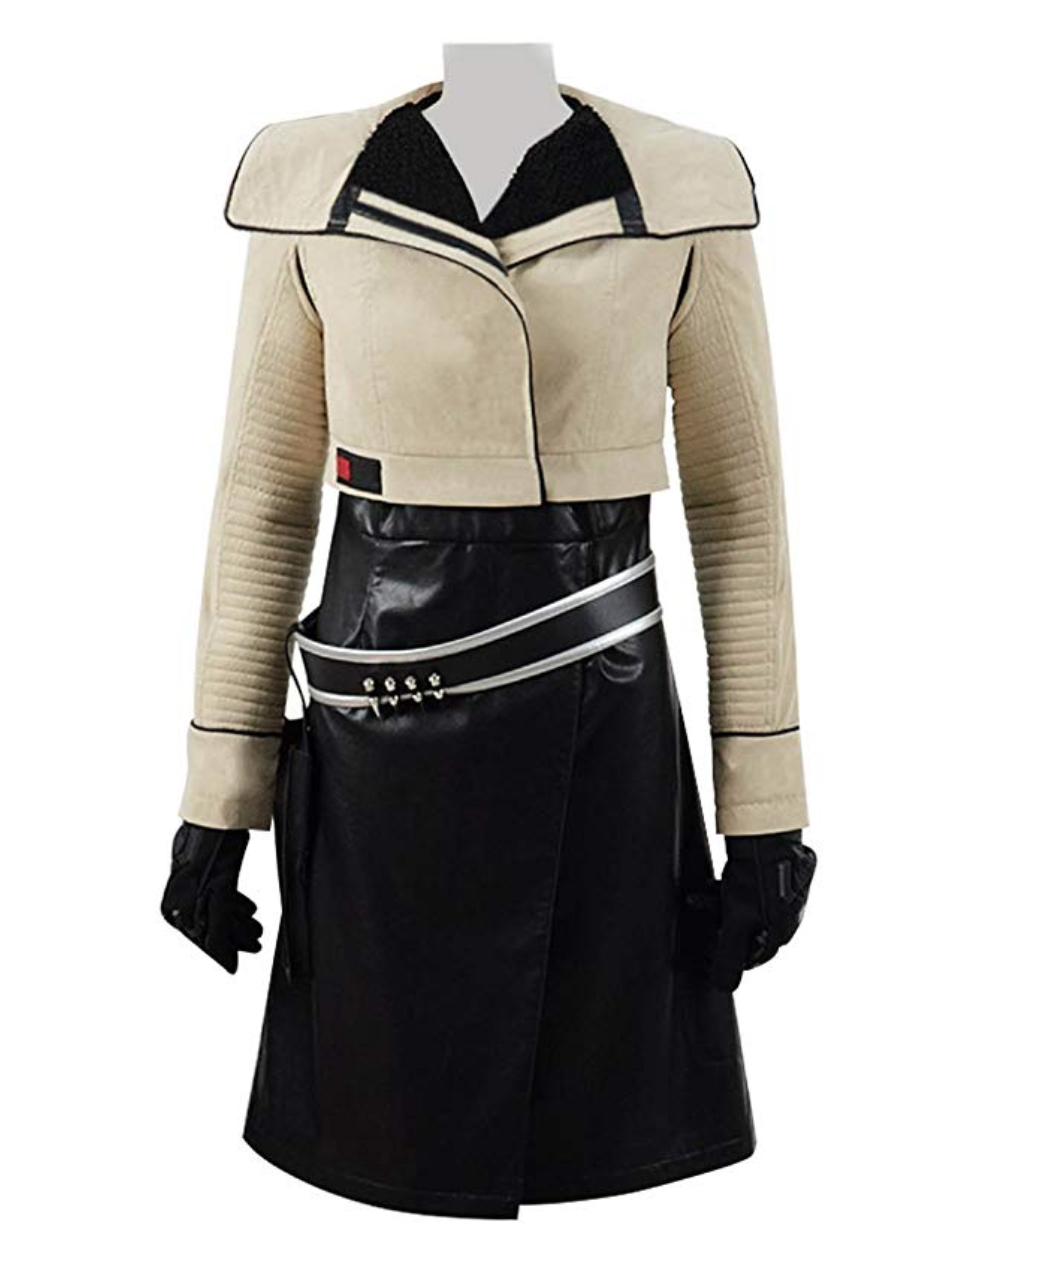 Solo: ASWS Qi'Ra Smuggling Suit Costume